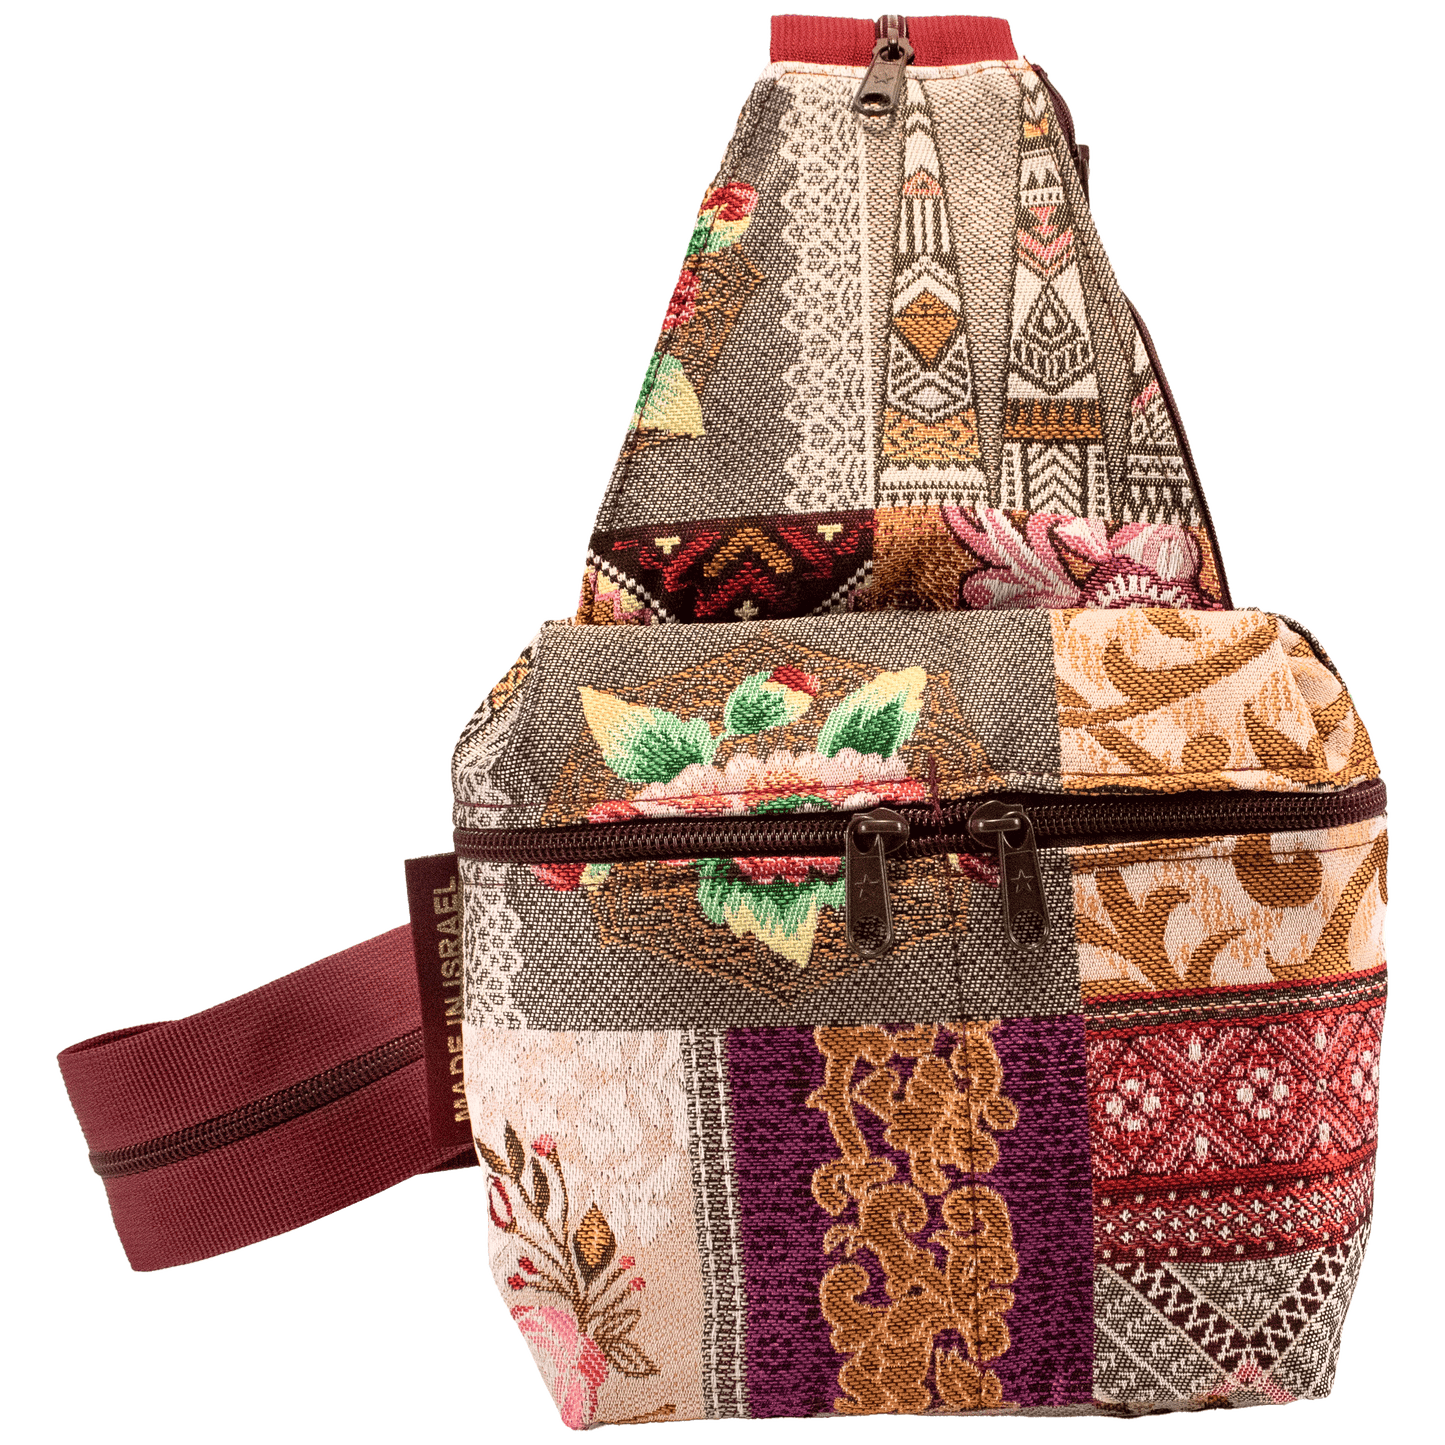 Small convertible backpack shoulder bag maroon and peach hue multi-pattern patchwork